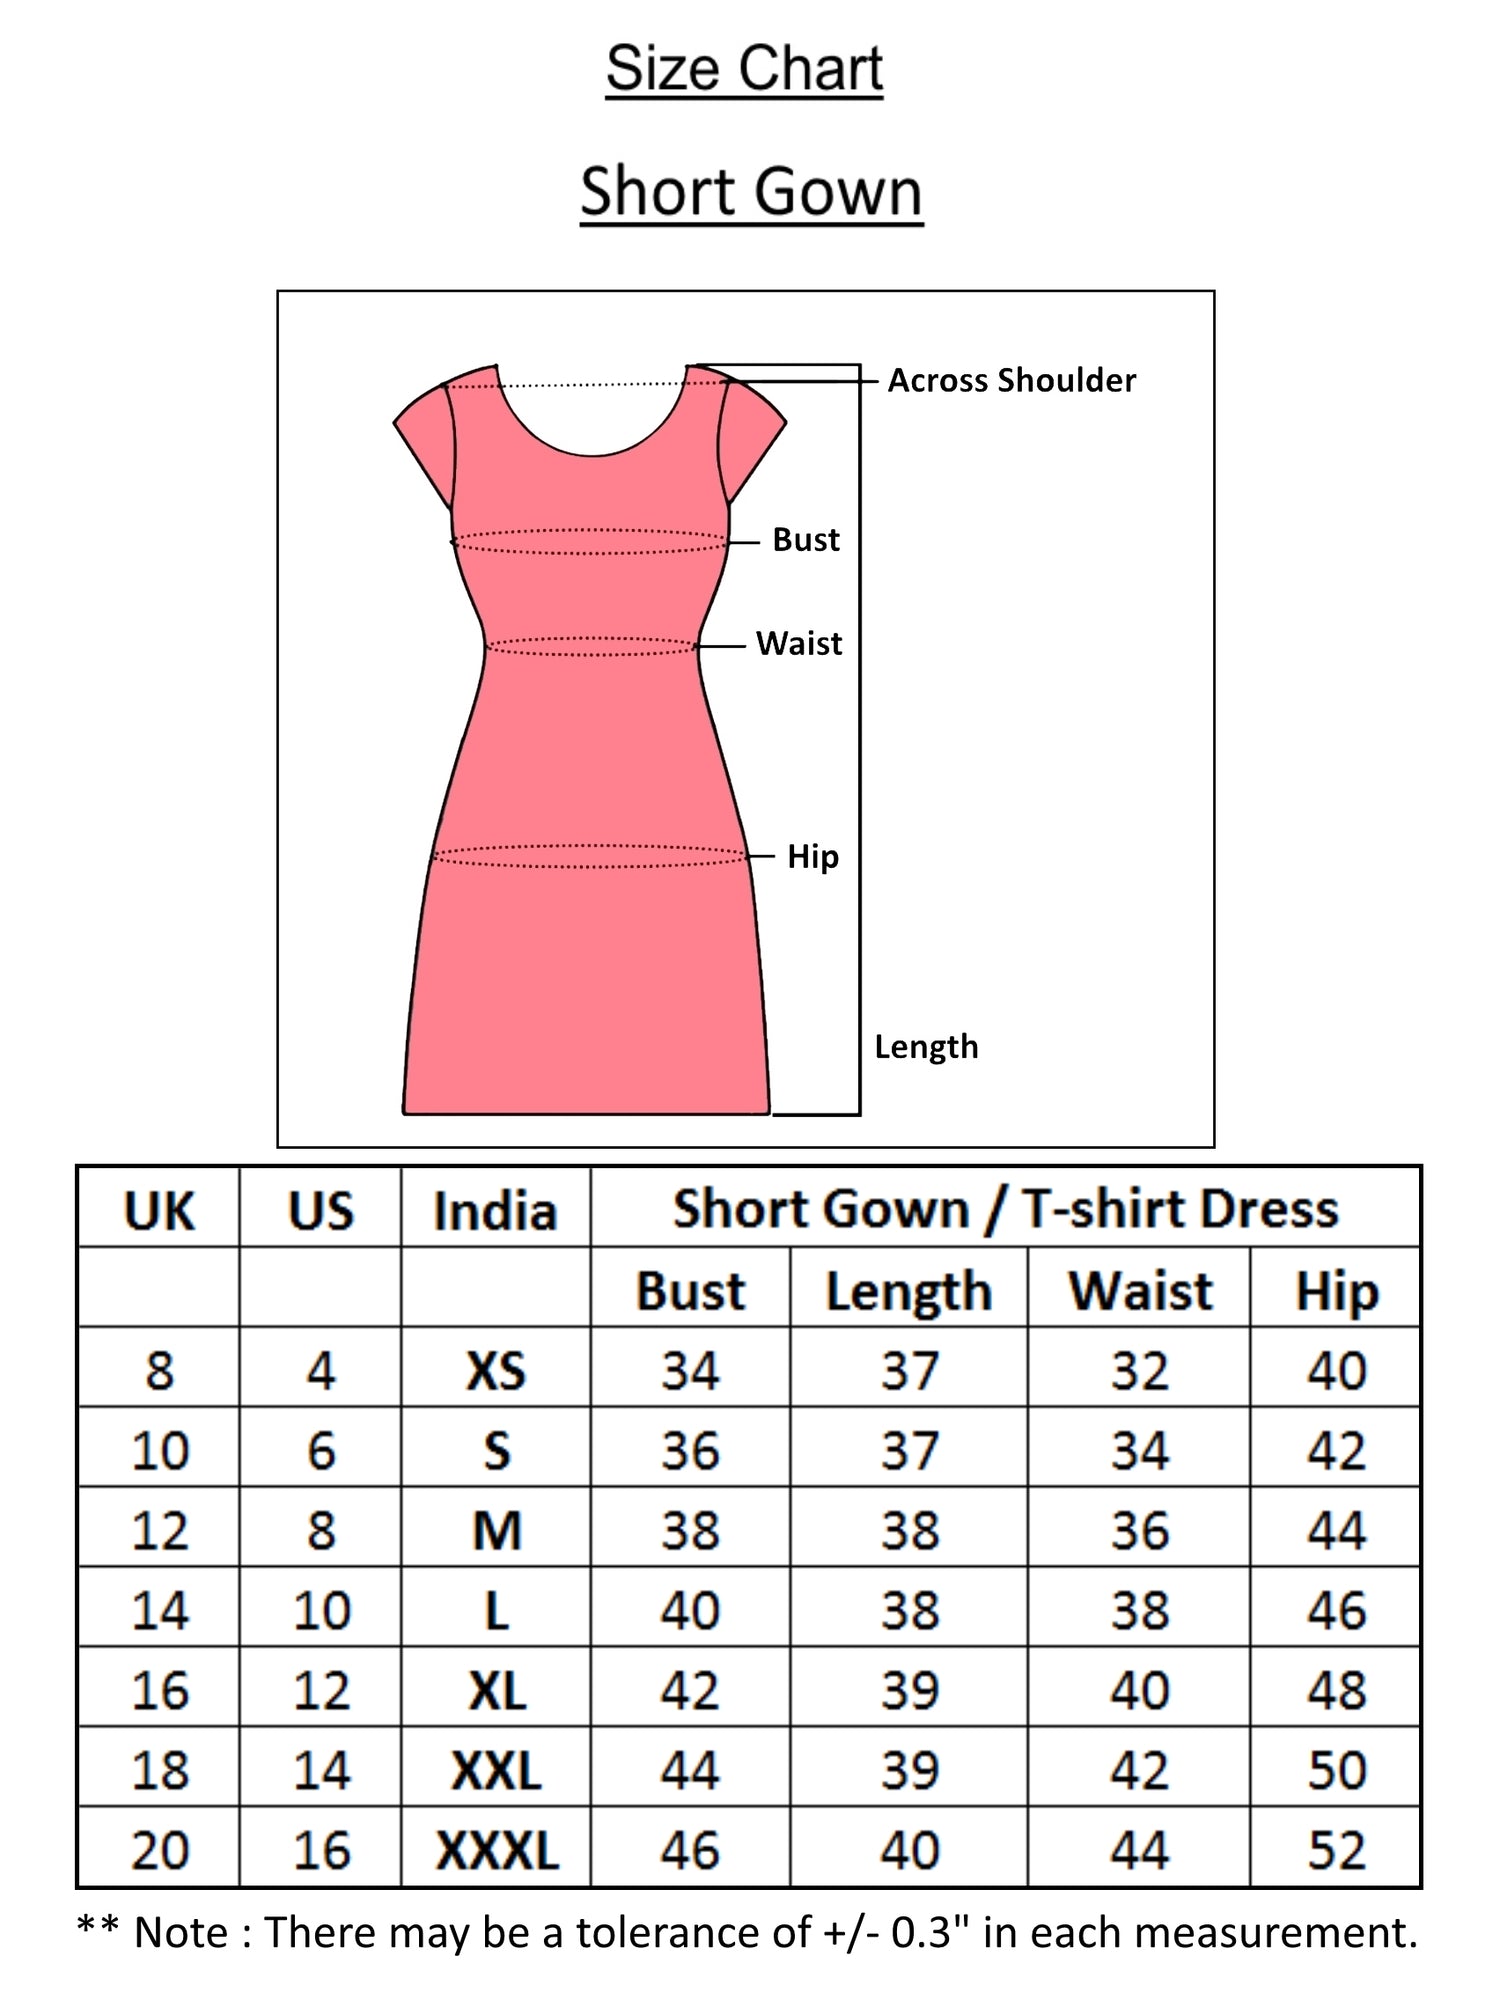 size chart with measurement details of all sizes of night short gown